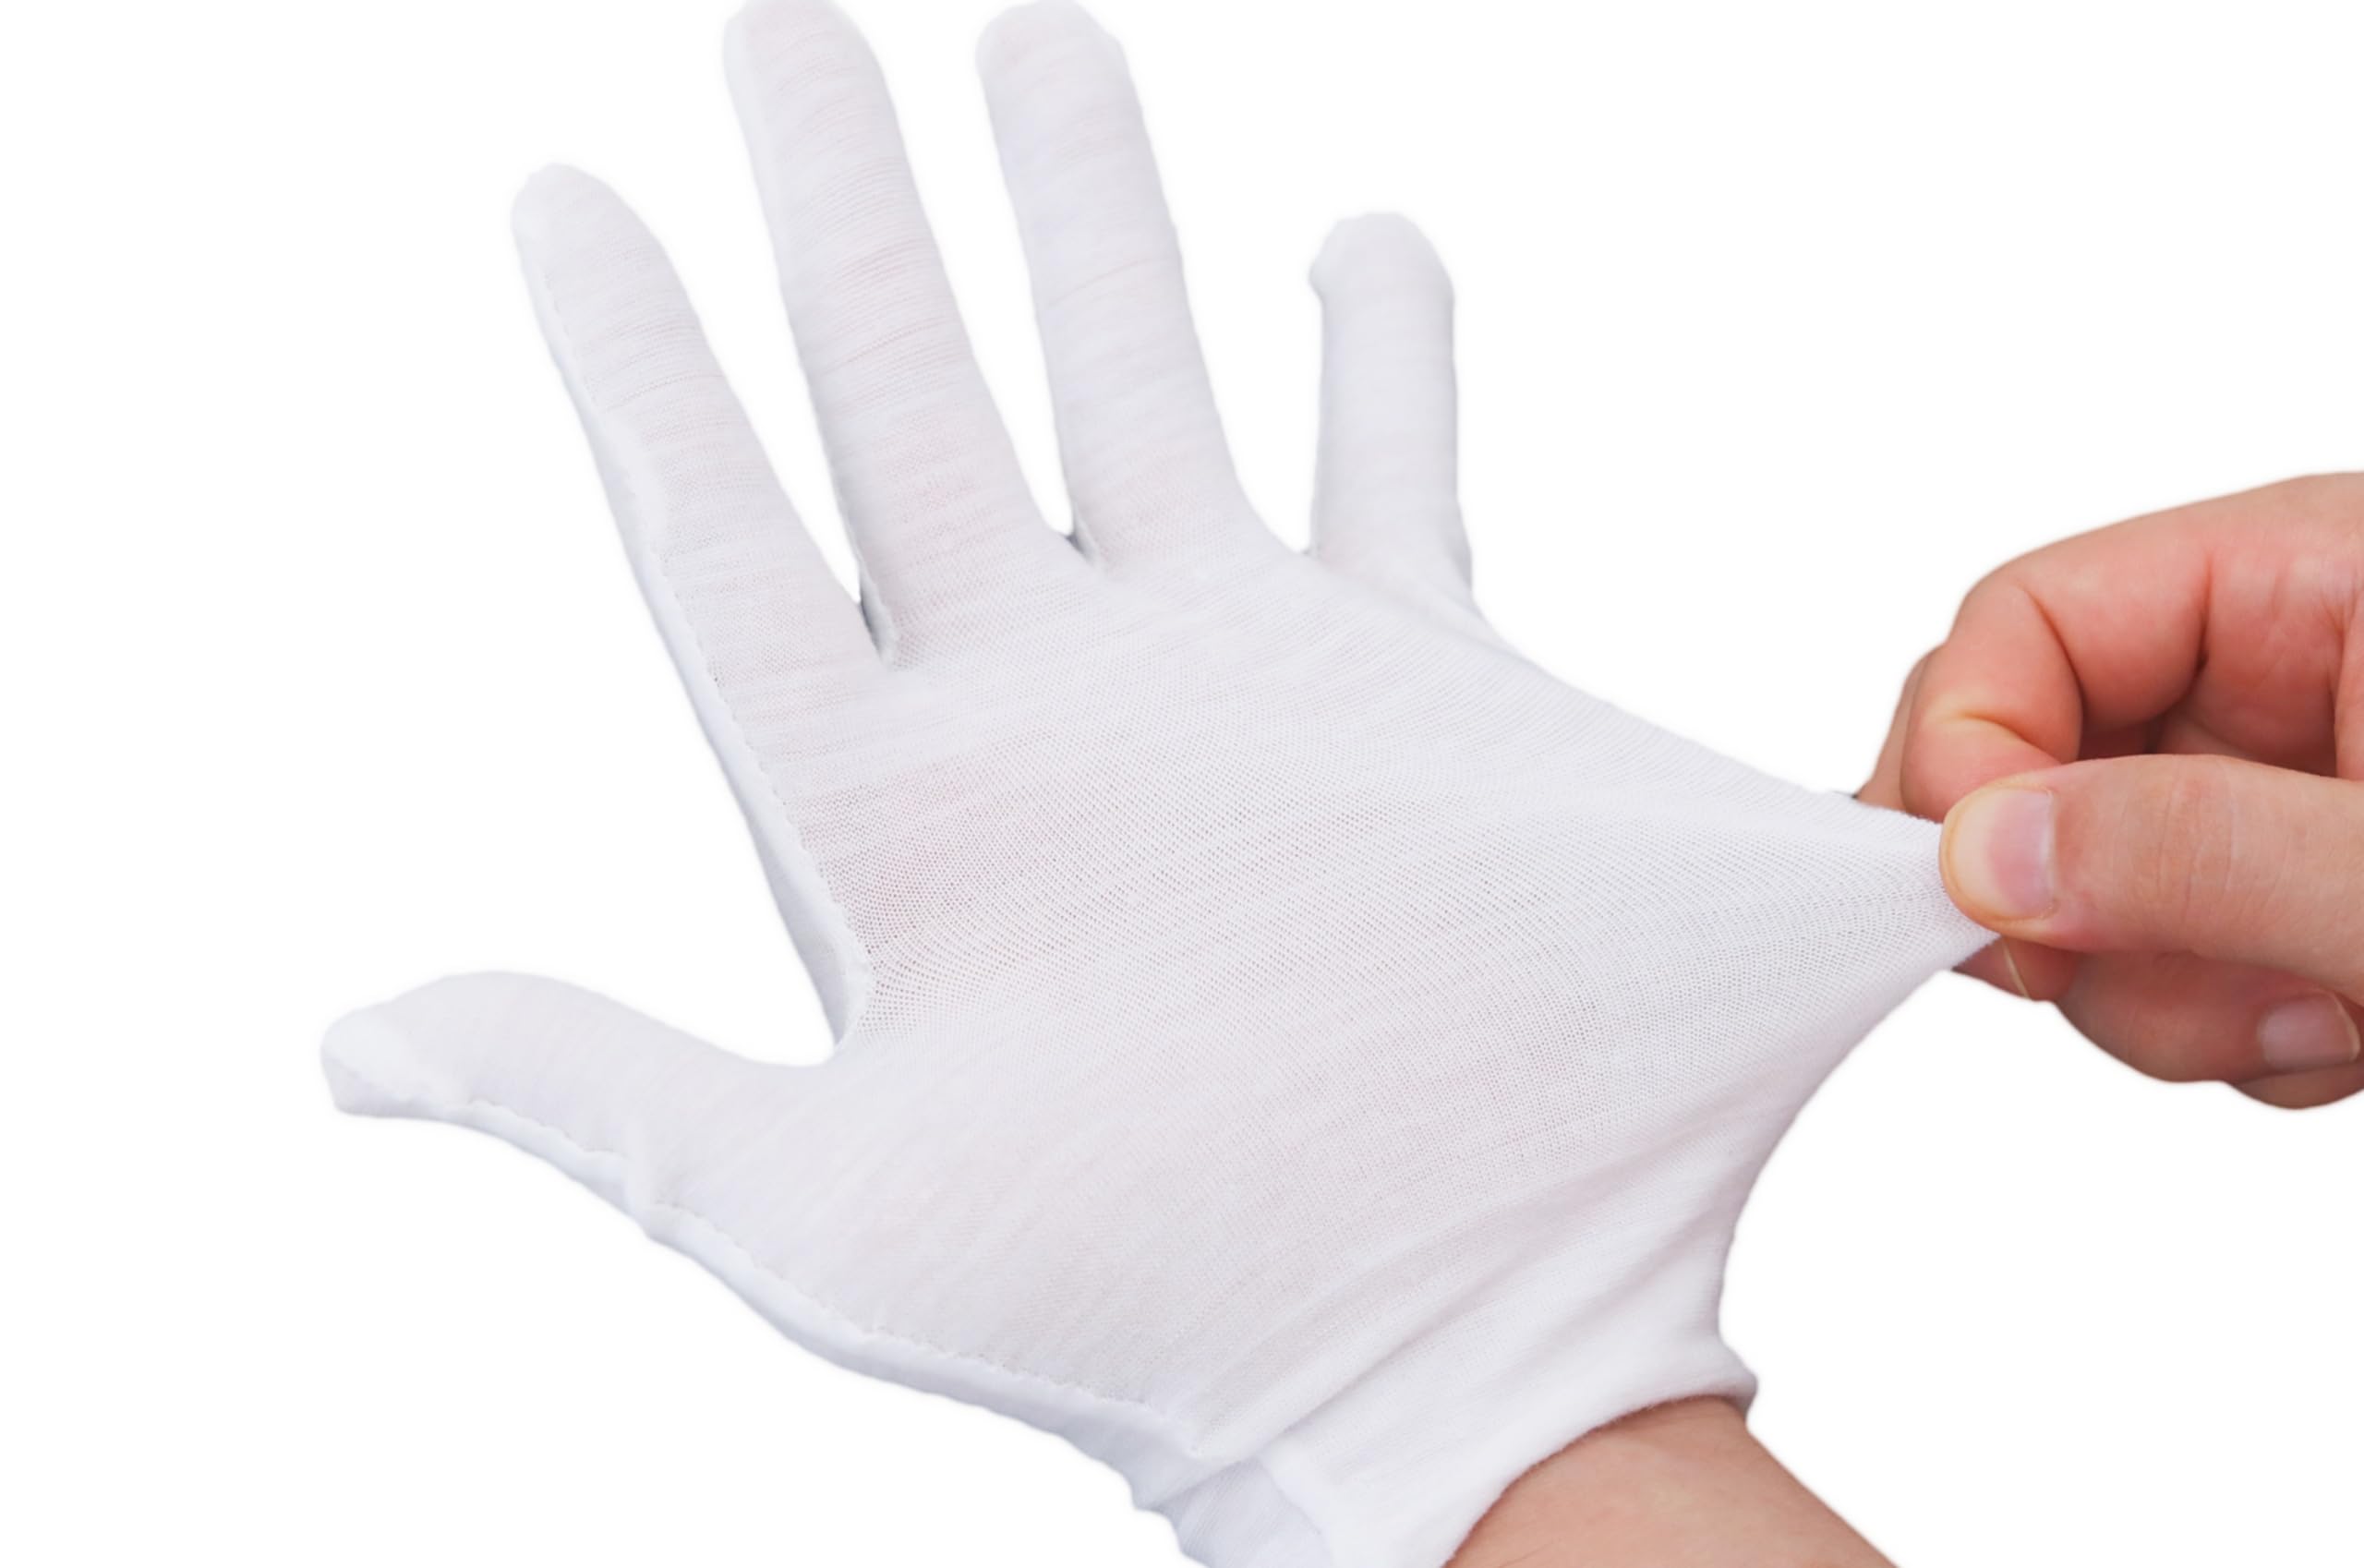 12 Pairs White Cotton Gloves Dry Hands,Soft Stretchy Working Gloves,for coins, Jewelry,Silver, Inspection Gloves